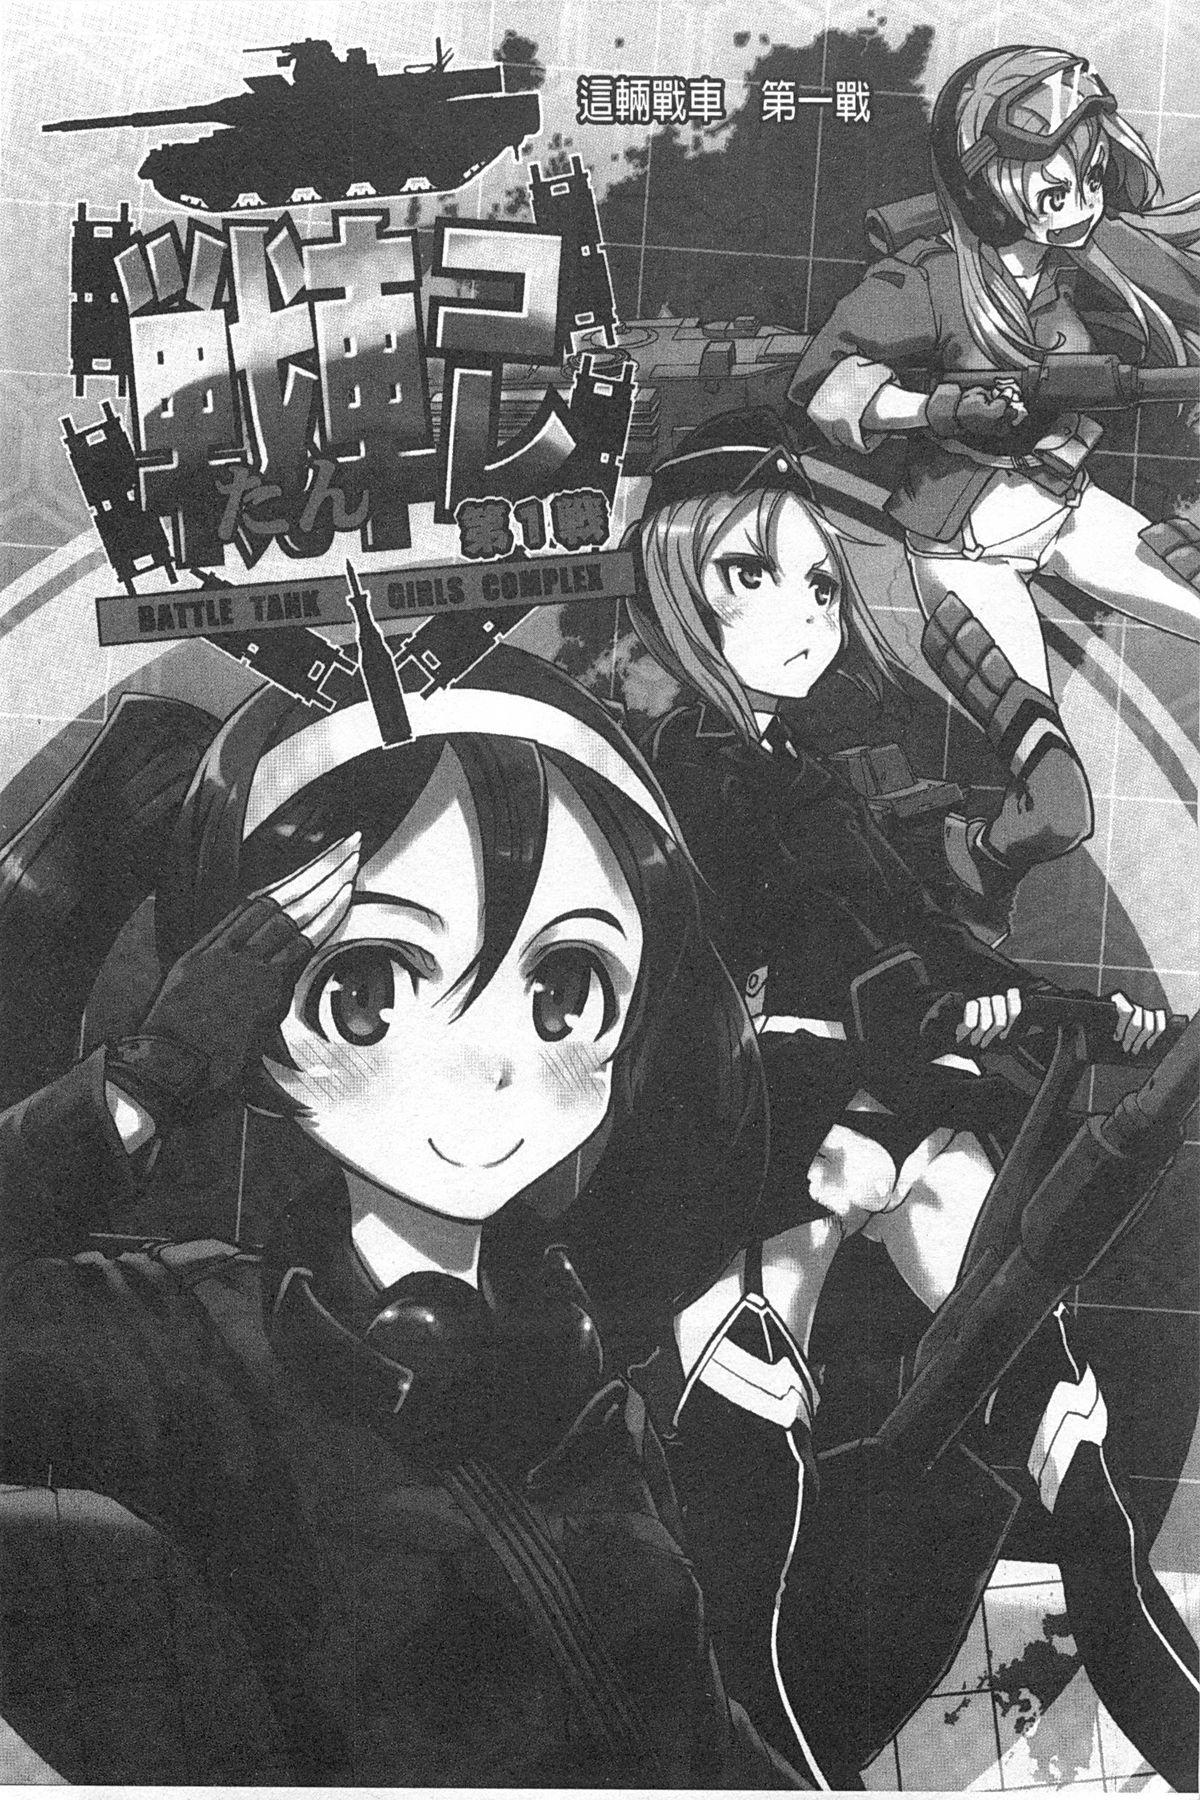 Cogiendo Tancolle - Battle Tank Girls Complex | TAN COLLE戰車收藏 Que - Page 6